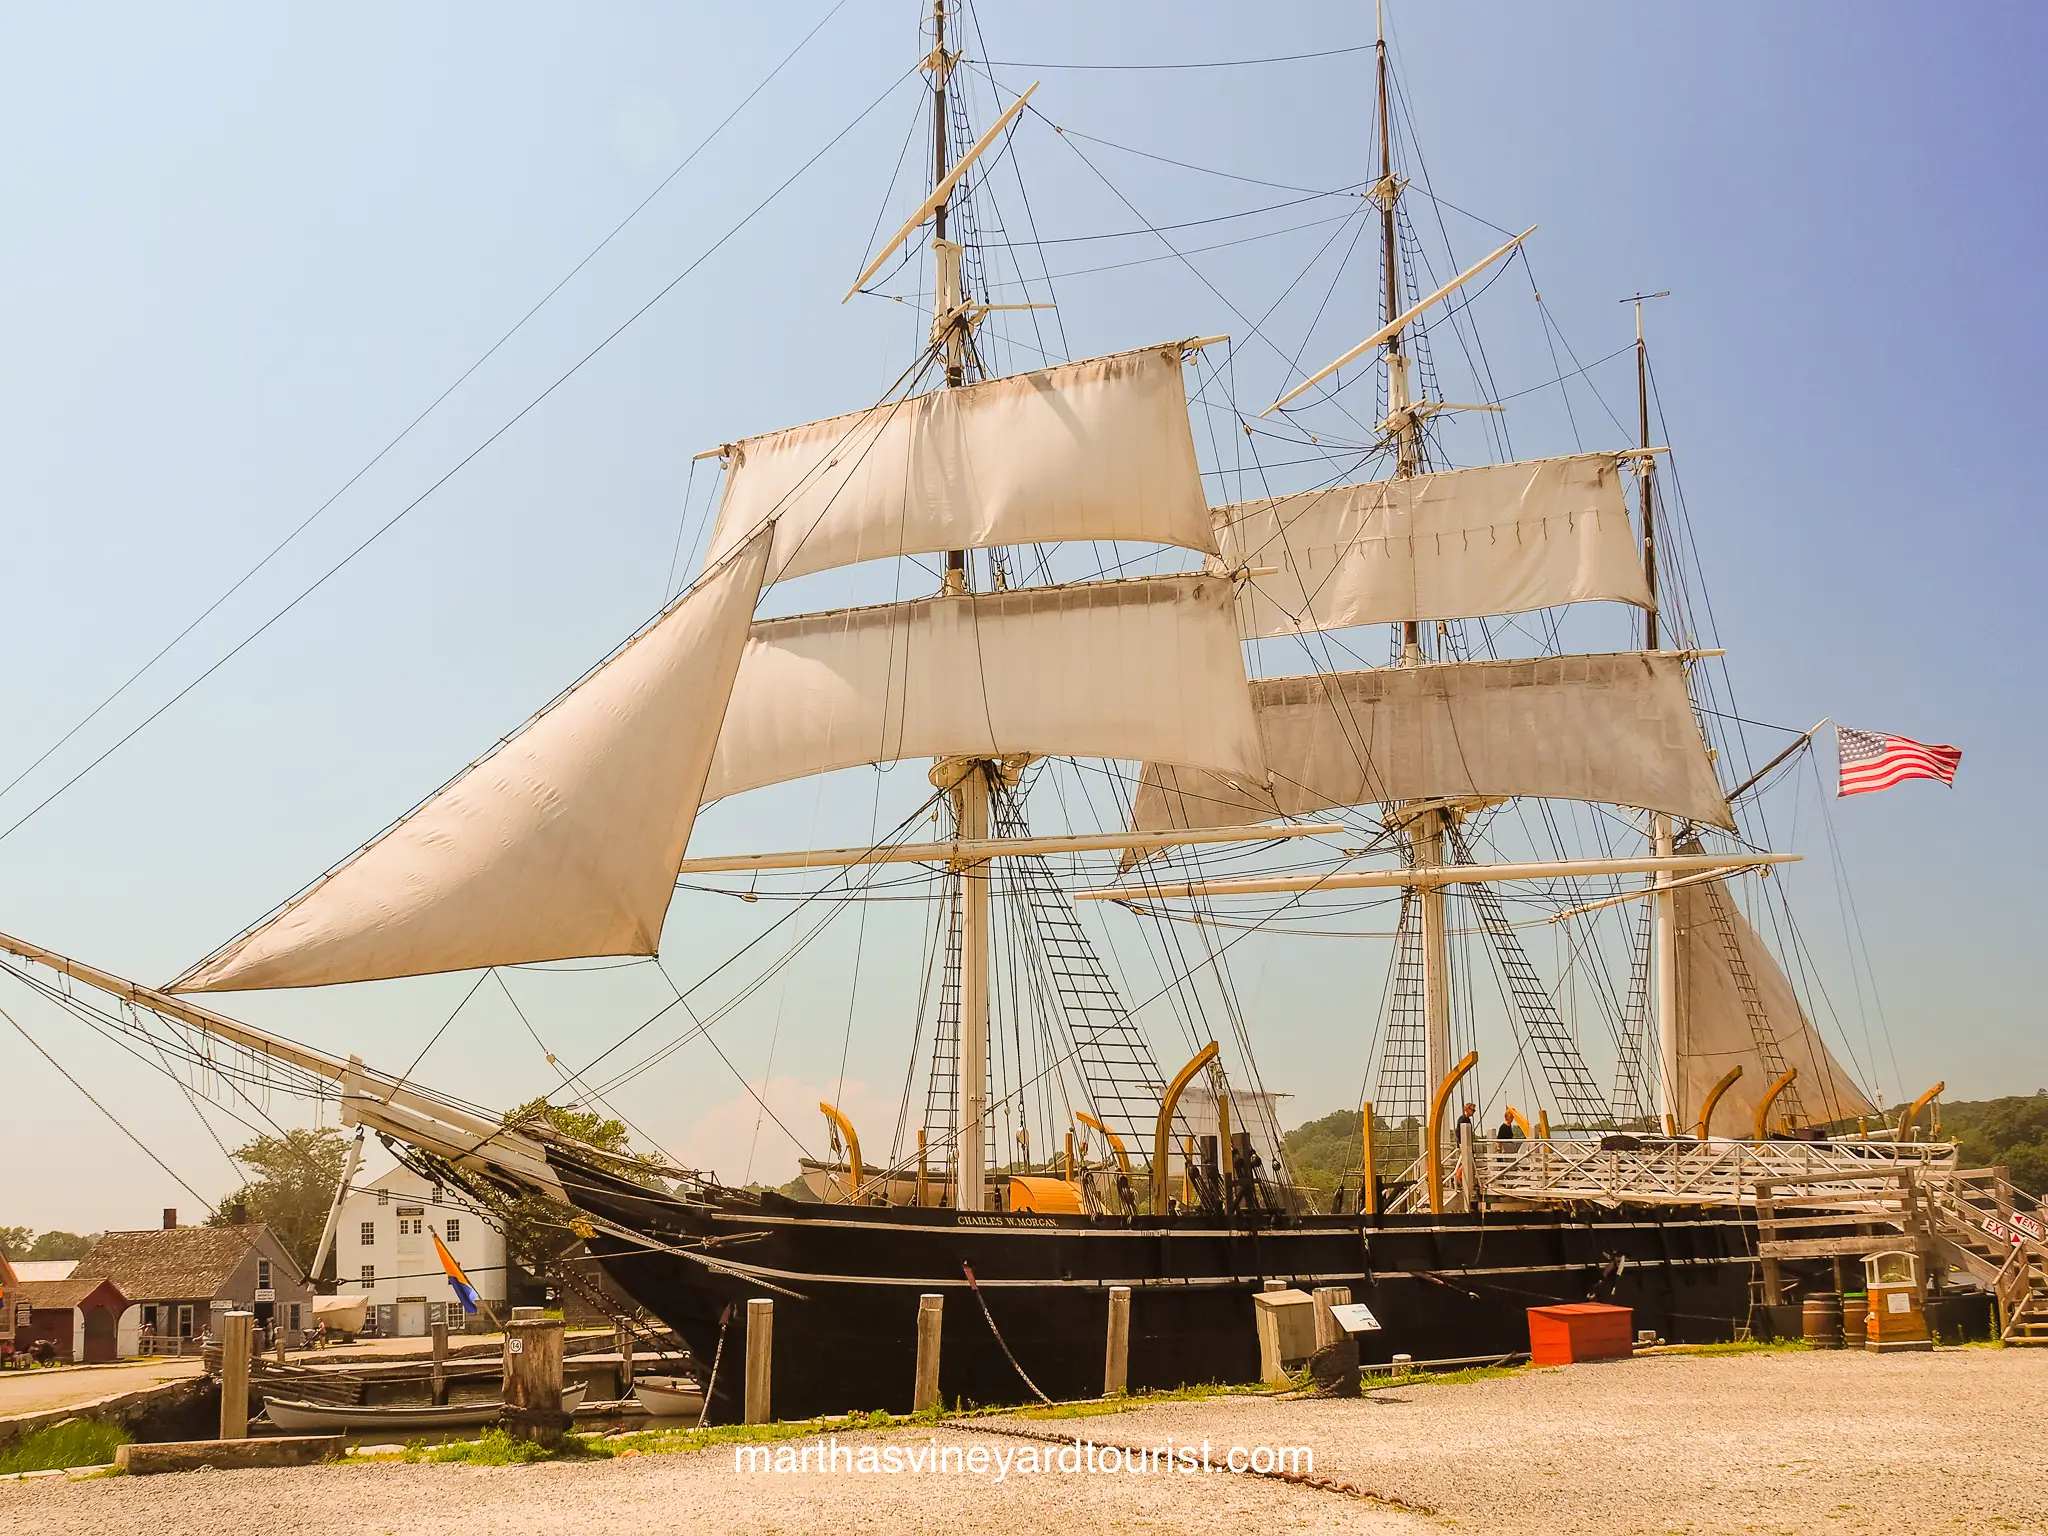 An old whaling ship at Mystic Seaport Museum